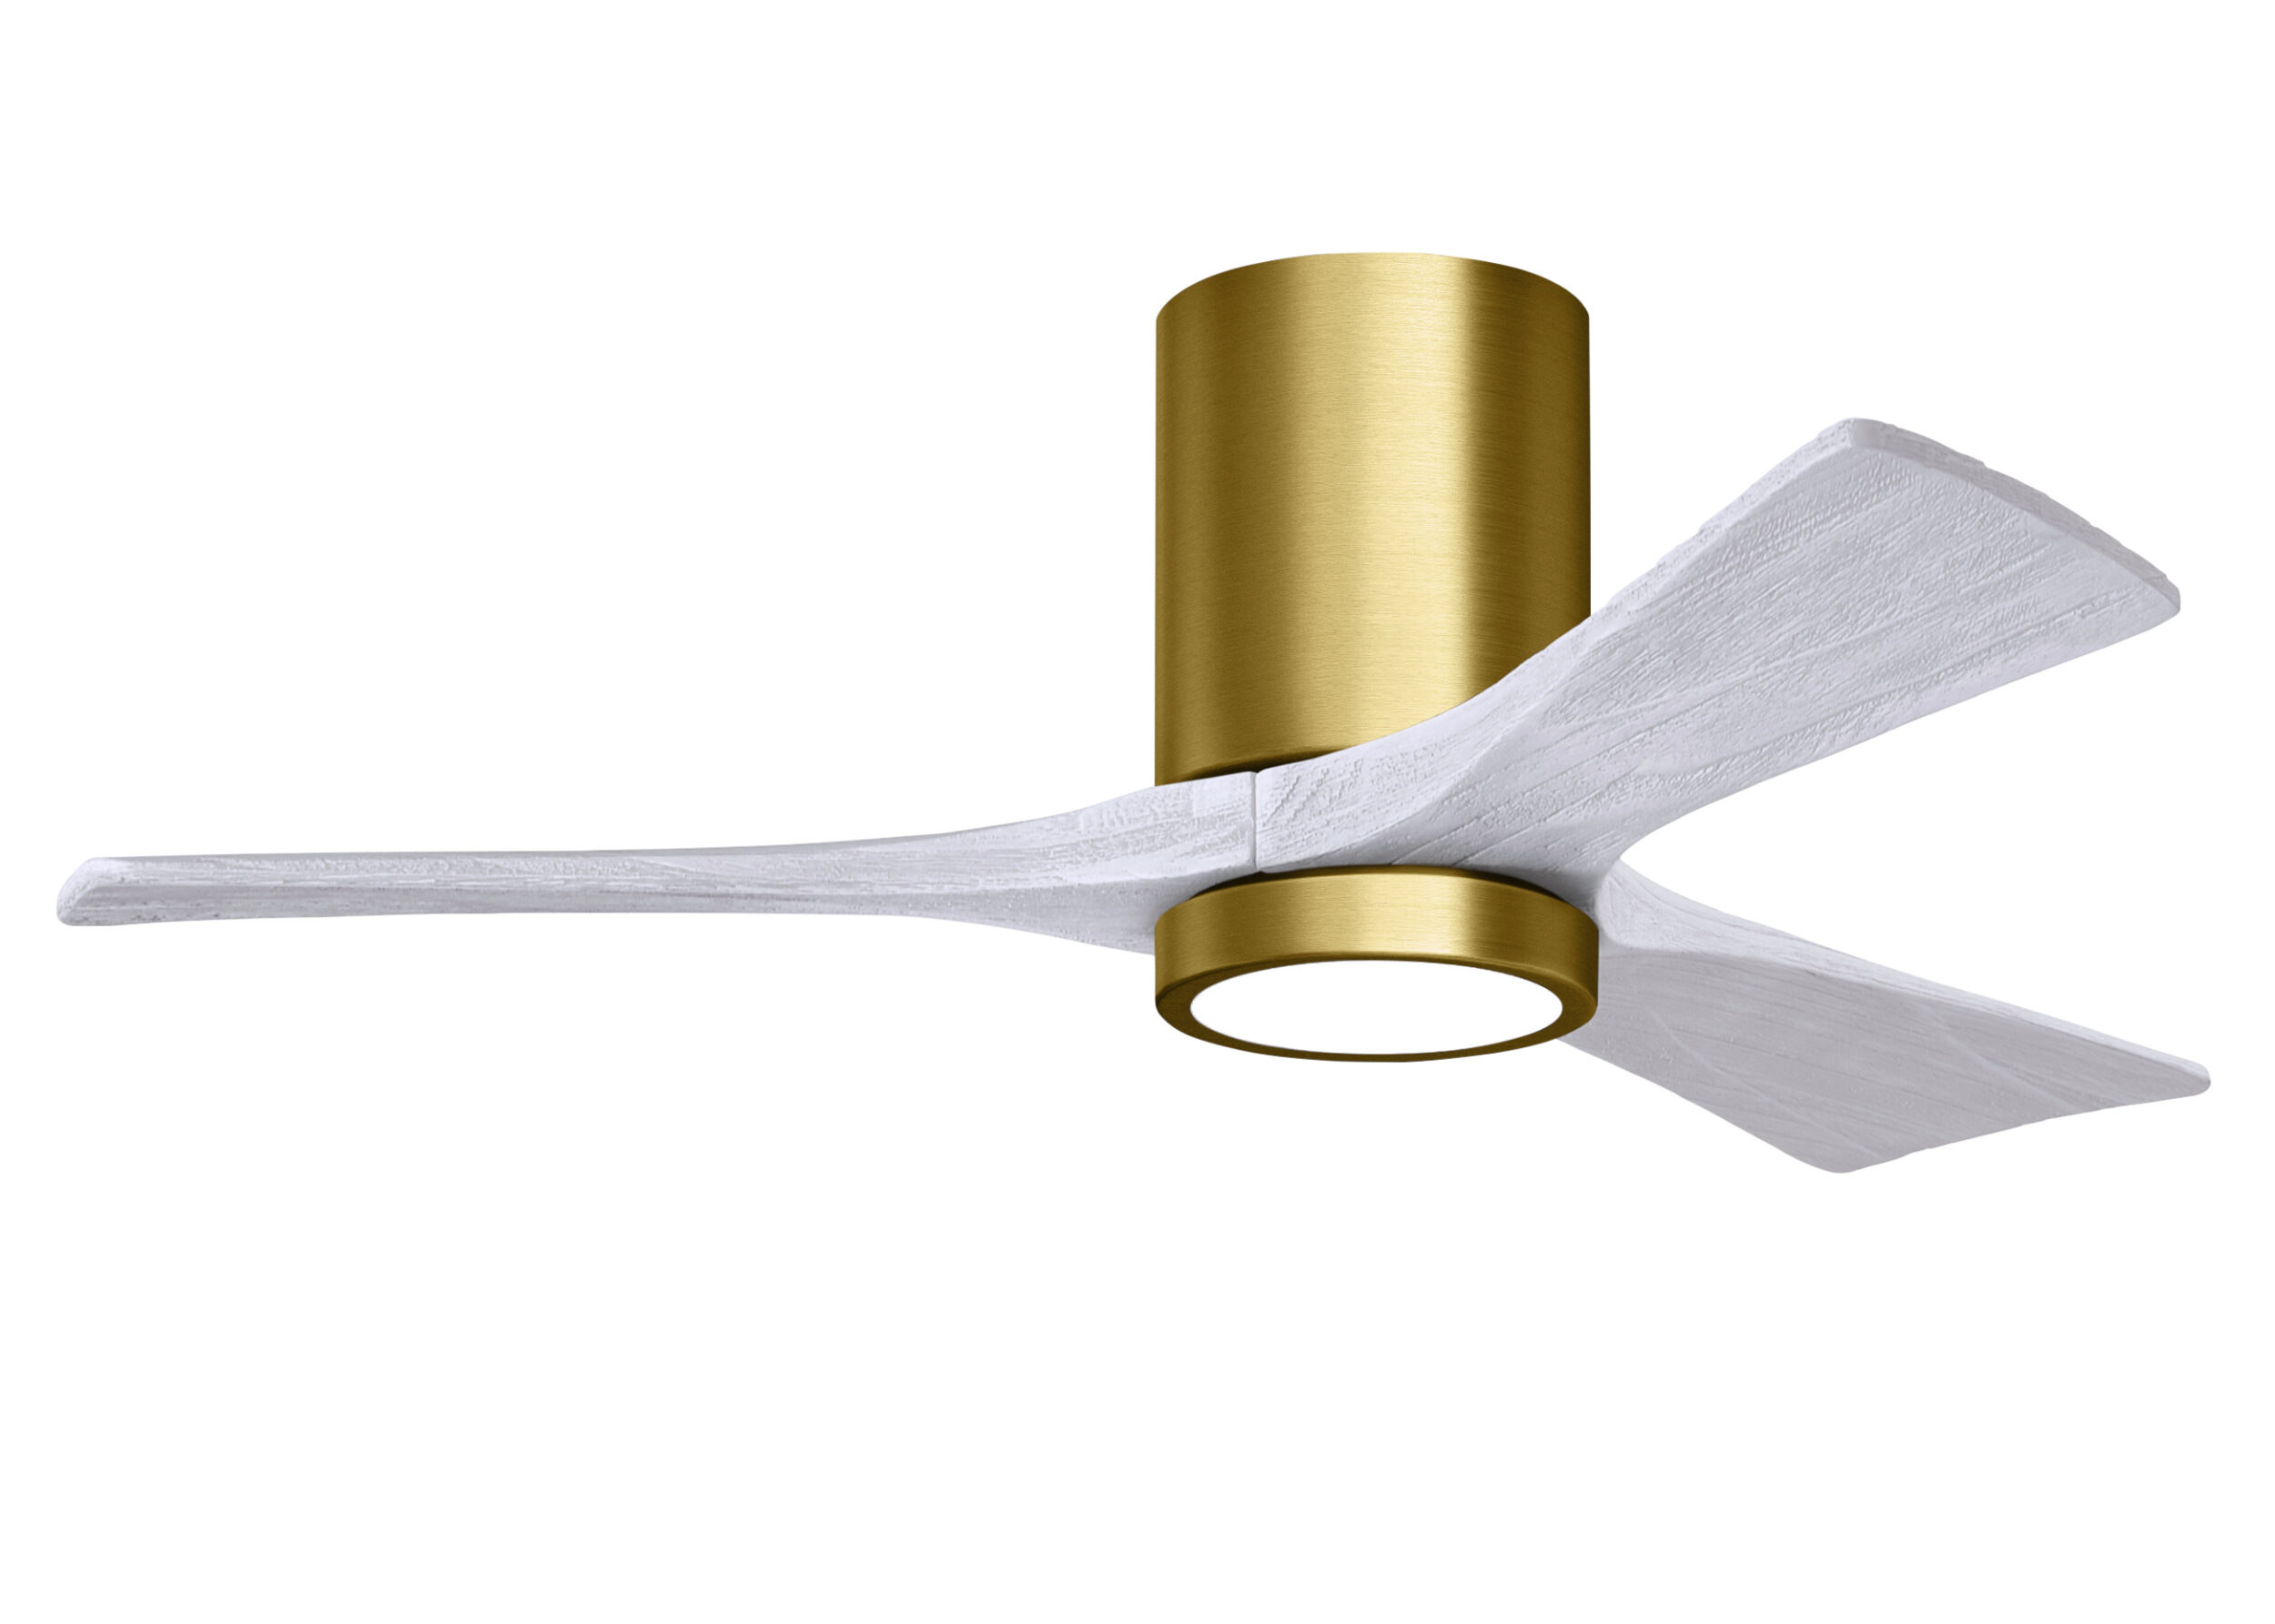 Irene-3HLK Ceiling Fan in Brushed Brass Finish with 42